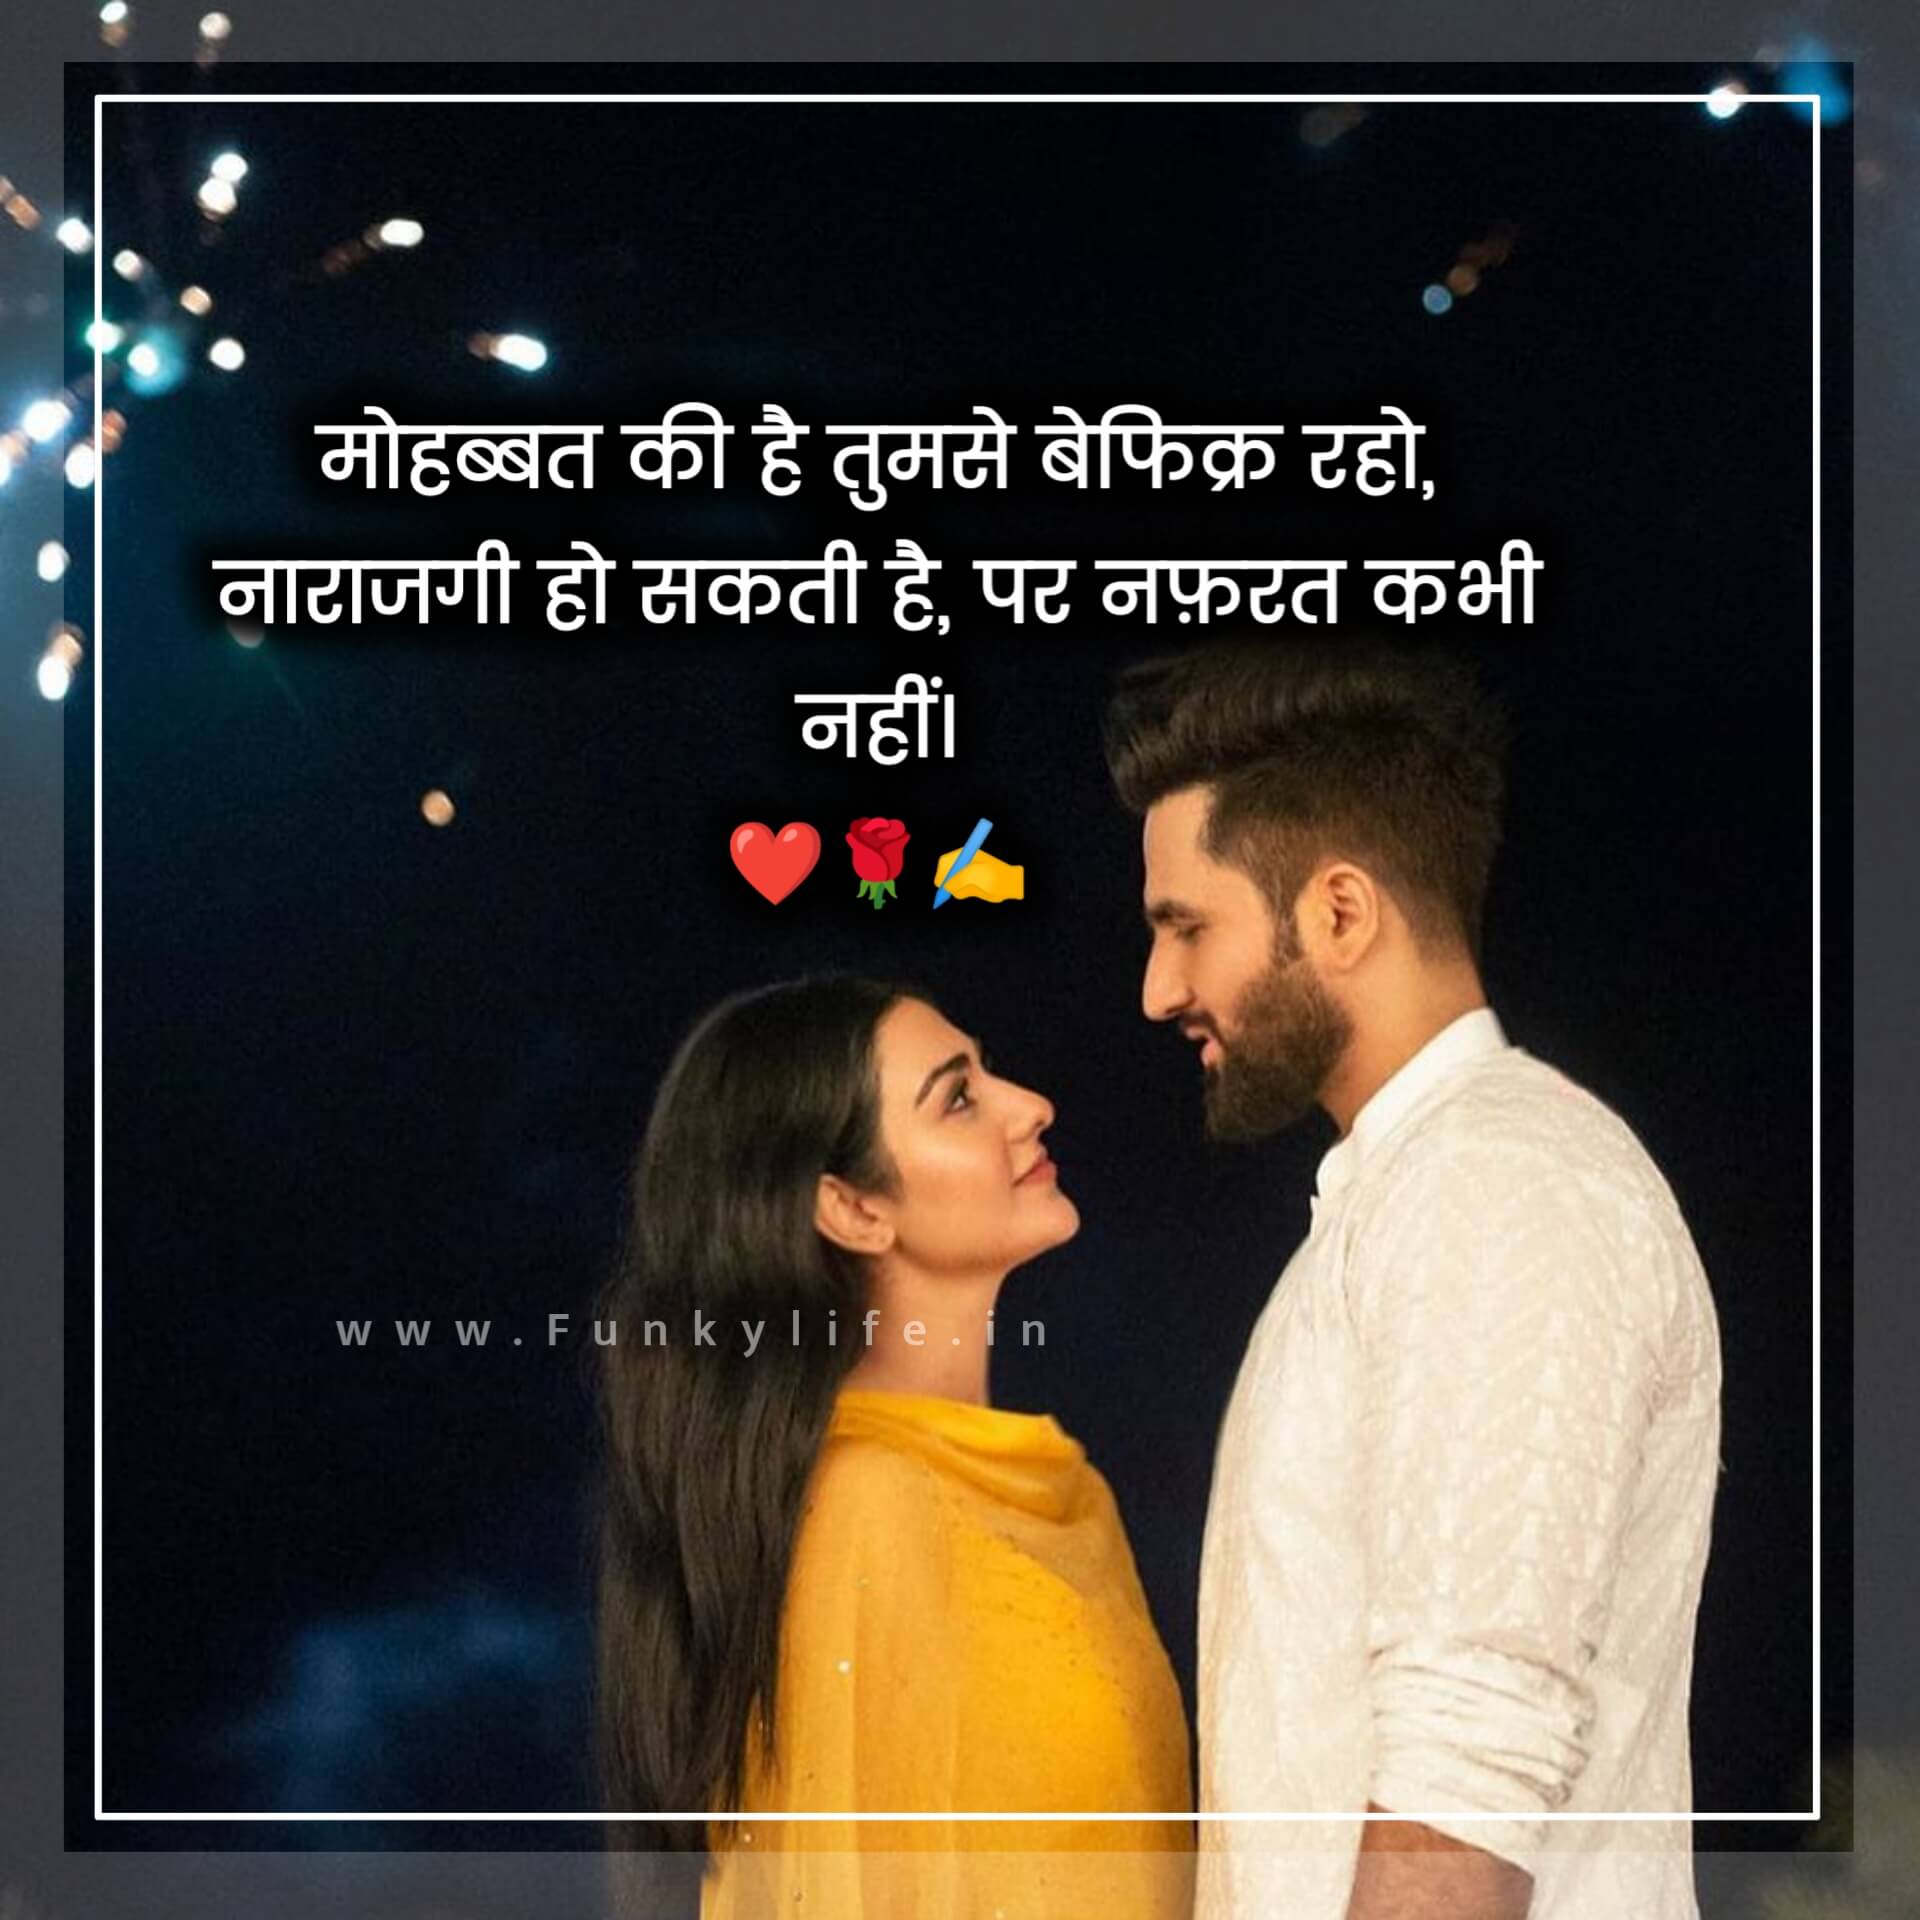 Love Quotes in Hindi with image